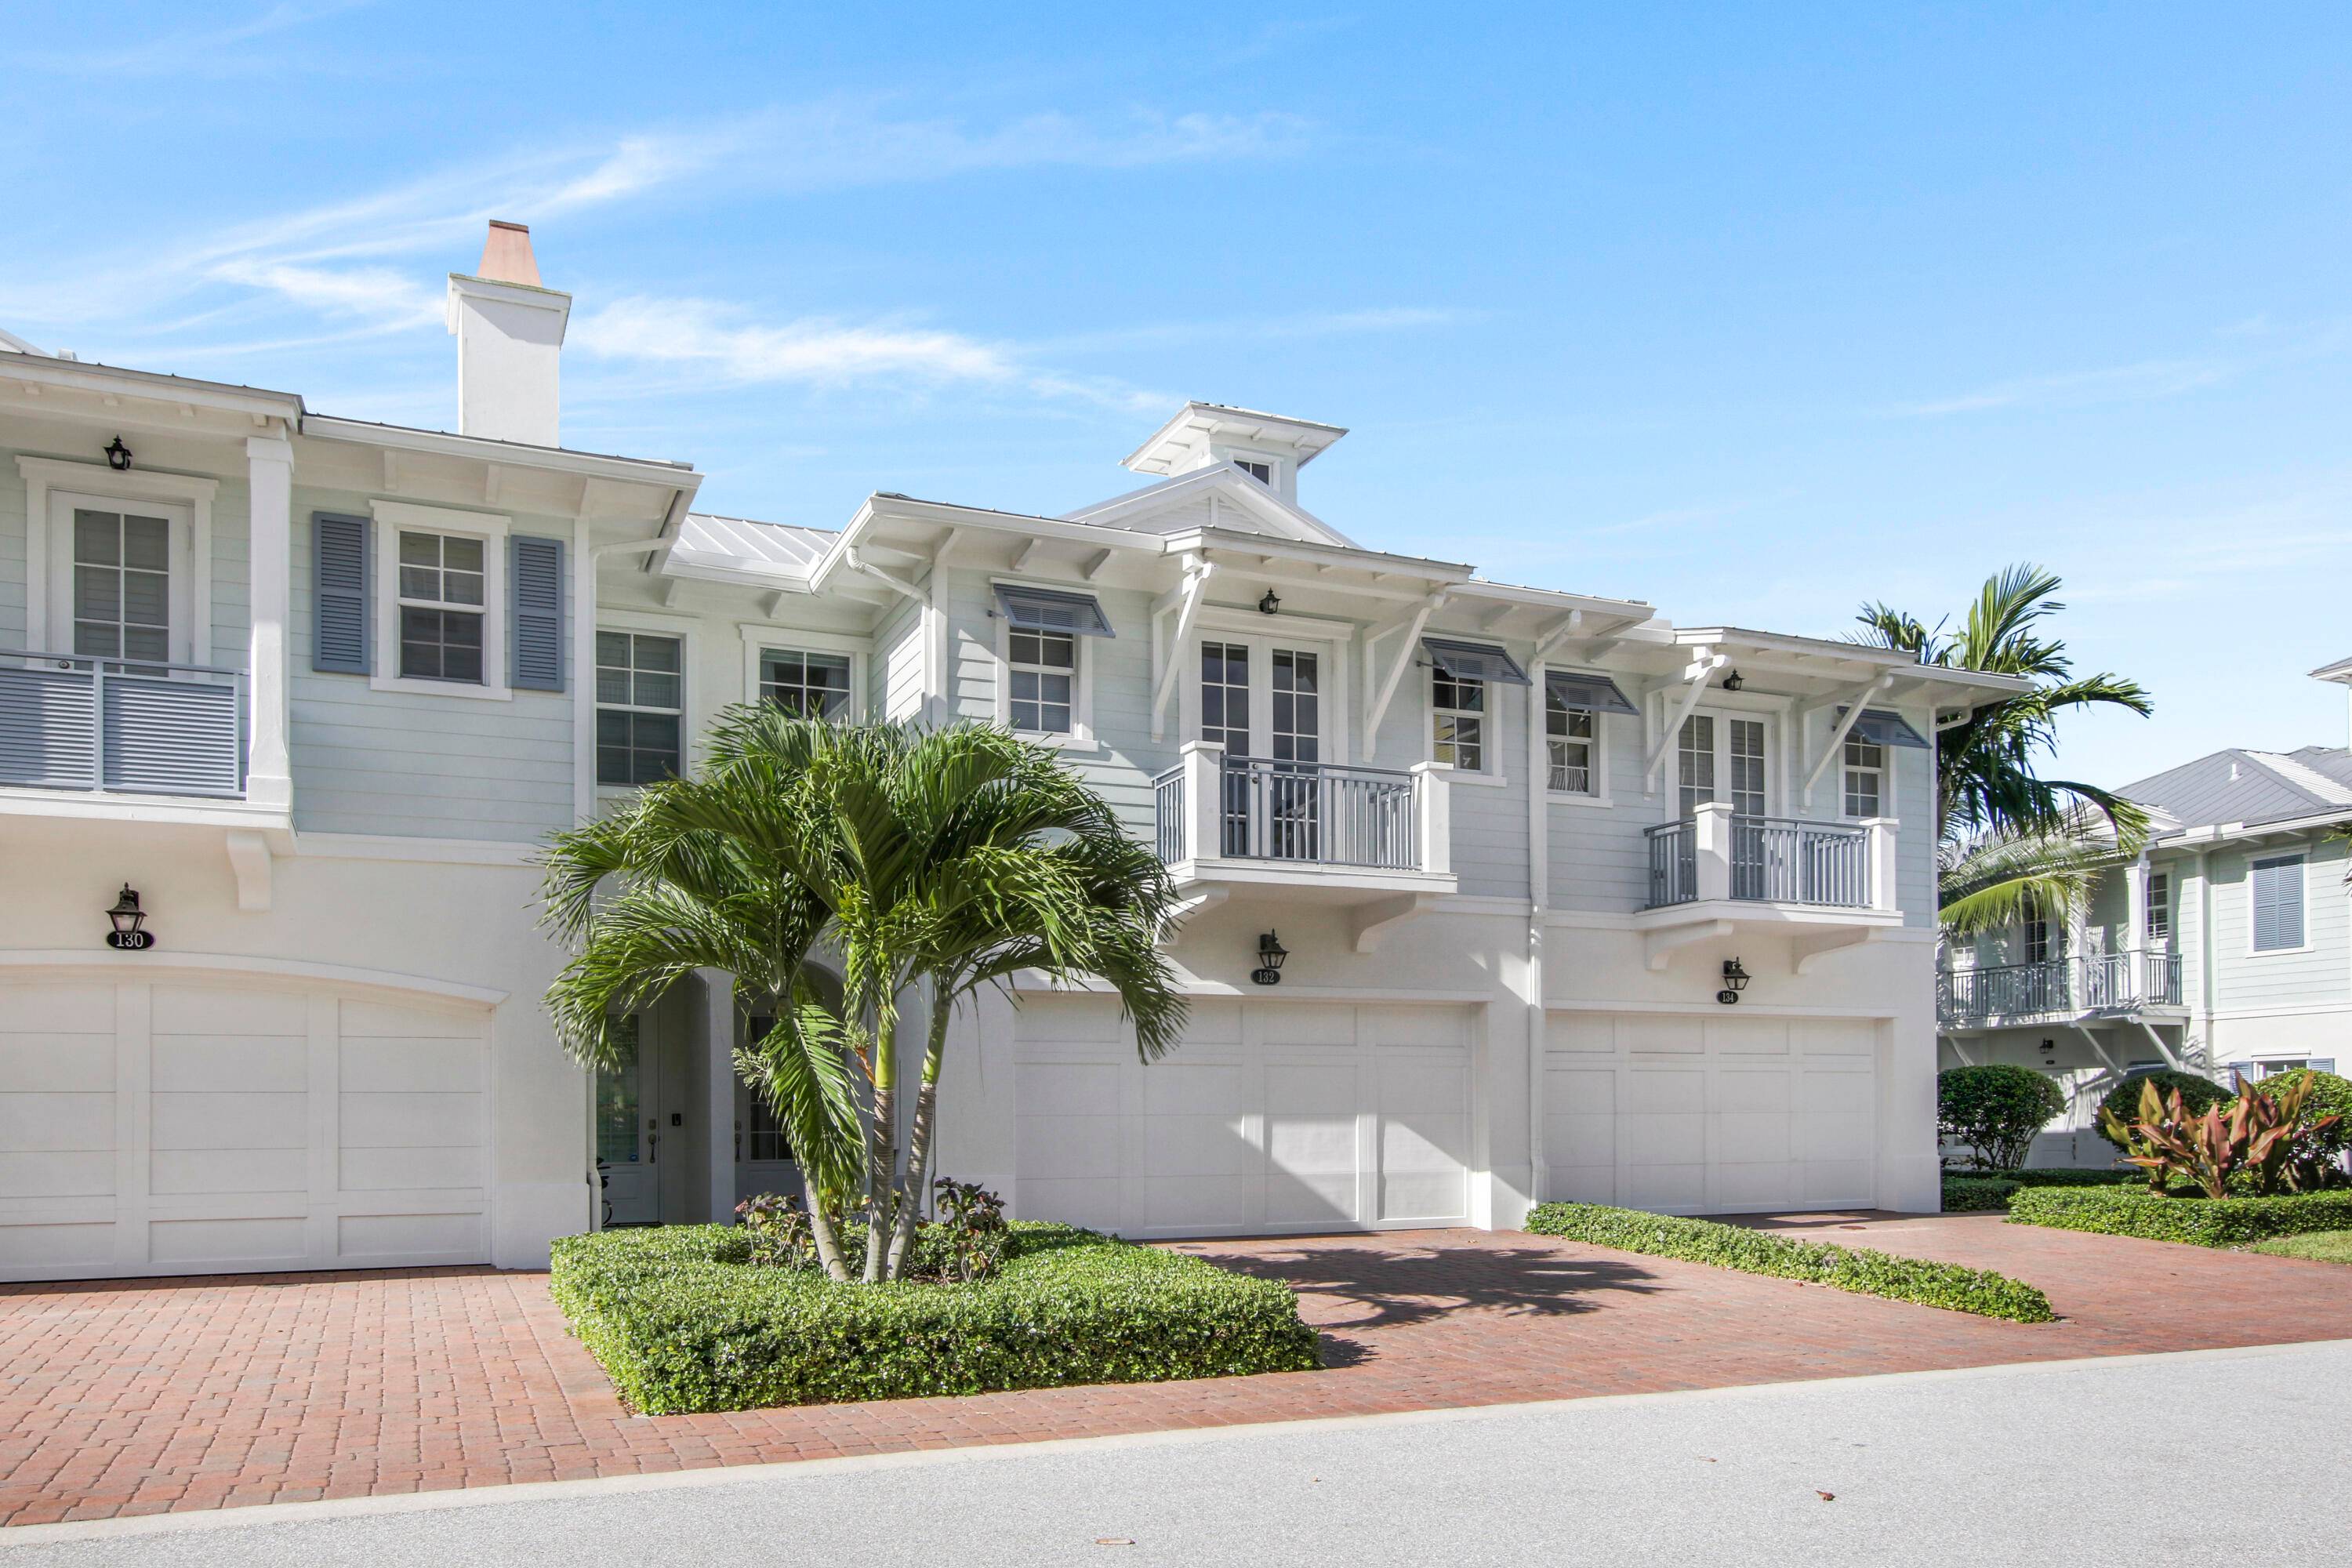 WALK TO THE BEACH ! Available immediately like new Ocean Breeze townhome rental in Juno Beach.